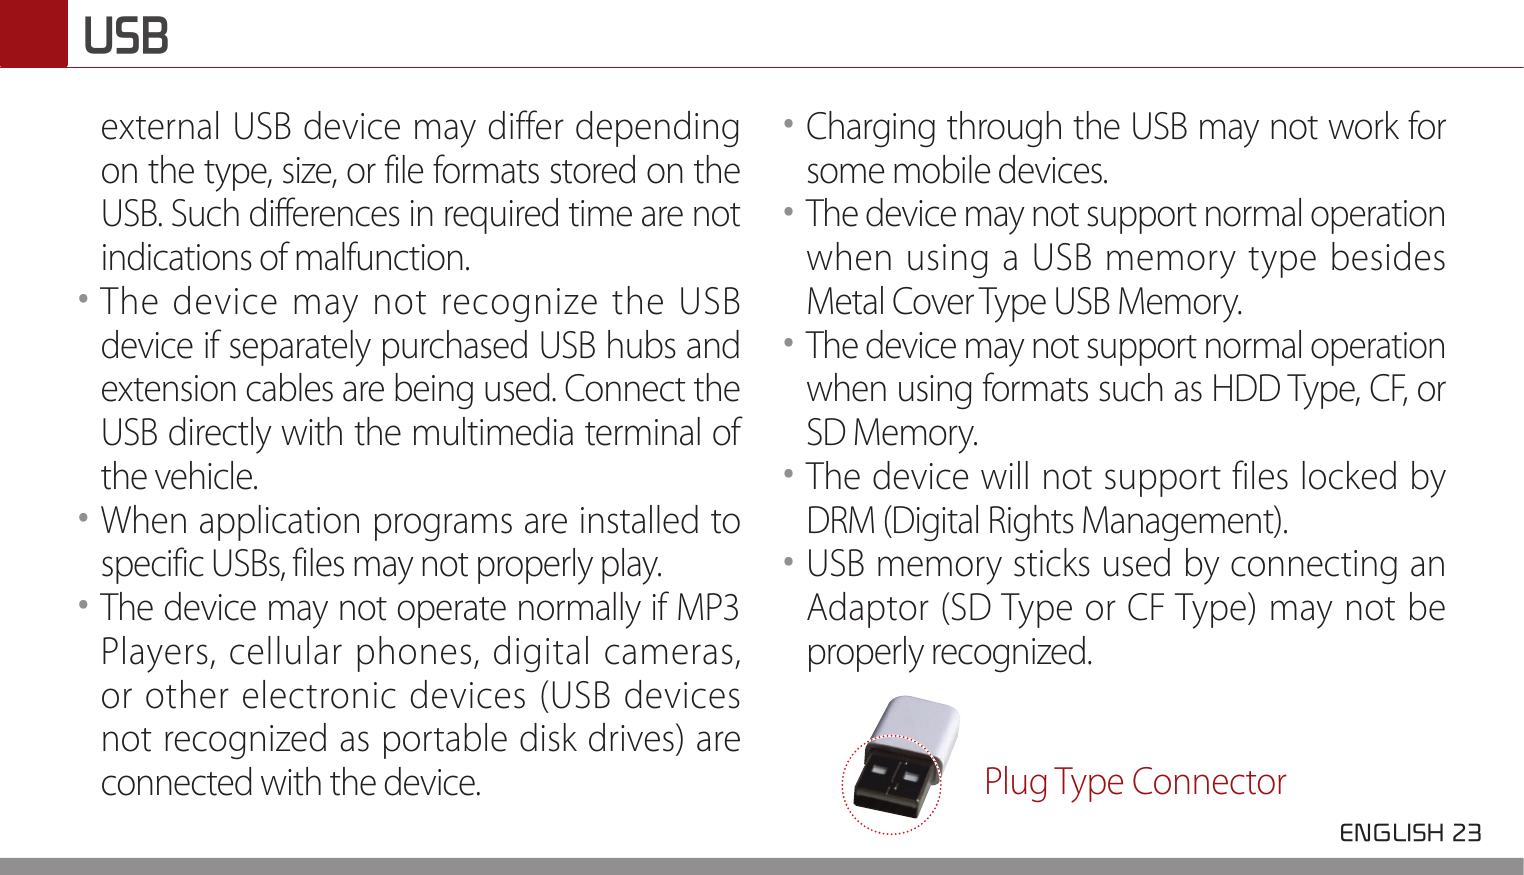  ENGLISH 23 USBexternal USB device may differ depending on the type, size, or file formats stored on the USB. Such differences in required time are not indications of malfunction. ••The device may not recognize the USB device if separately purchased USB hubs and extension cables are being used. Connect the USB directly with the multimedia terminal of the vehicle. ••When application programs are installed to specific USBs, files may not properly play. ••The device may not operate normally if MP3 Players, cellular phones, digital cameras, or other electronic devices (USB devices not recognized as portable disk drives) are connected with the device. ••Charging through the USB may not work for some mobile devices. ••The device may not support normal operation when using a USB memory type besides Metal Cover Type USB Memory. ••The device may not support normal operation when using formats such as HDD Type, CF, or SD Memory. ••The device will not support files locked by DRM (Digital Rights Management). ••USB memory sticks used by connecting an Adaptor (SD Type or CF Type) may not be properly recognized. Plug Type Connector